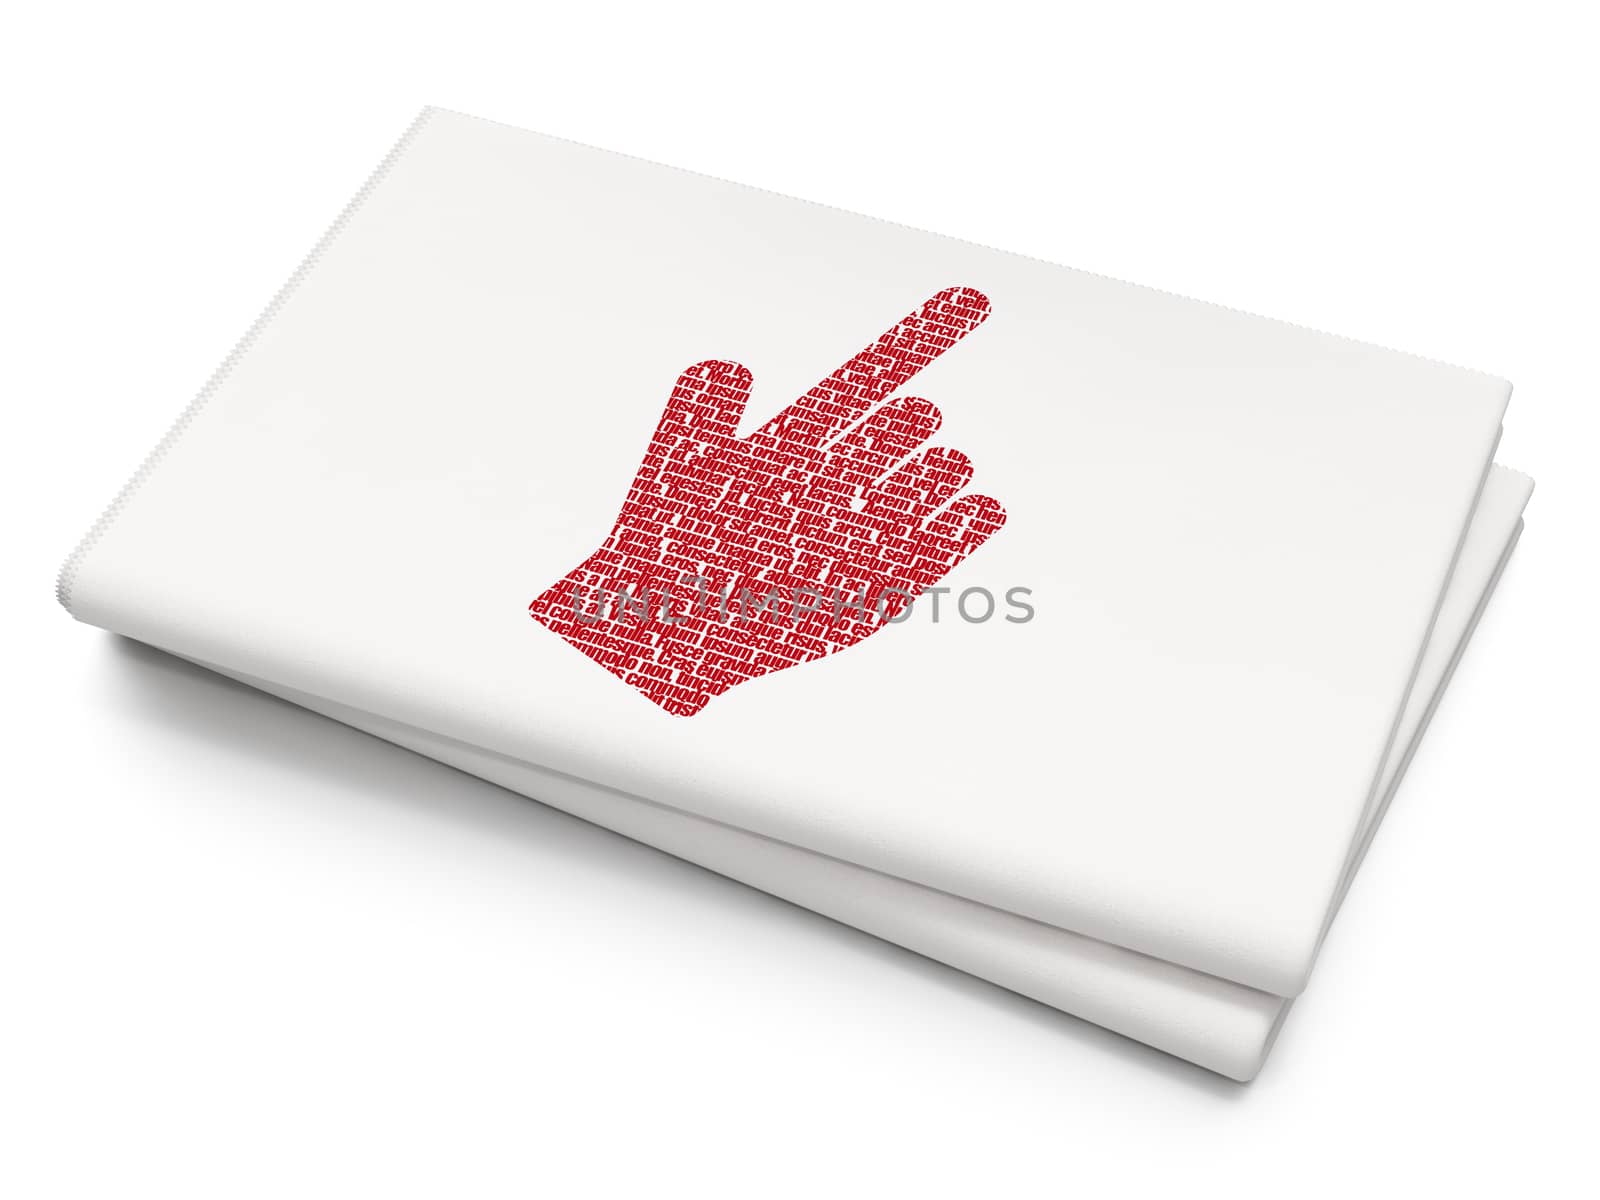 Marketing concept: Pixelated red Mouse Cursor icon on Blank Newspaper background, 3D rendering